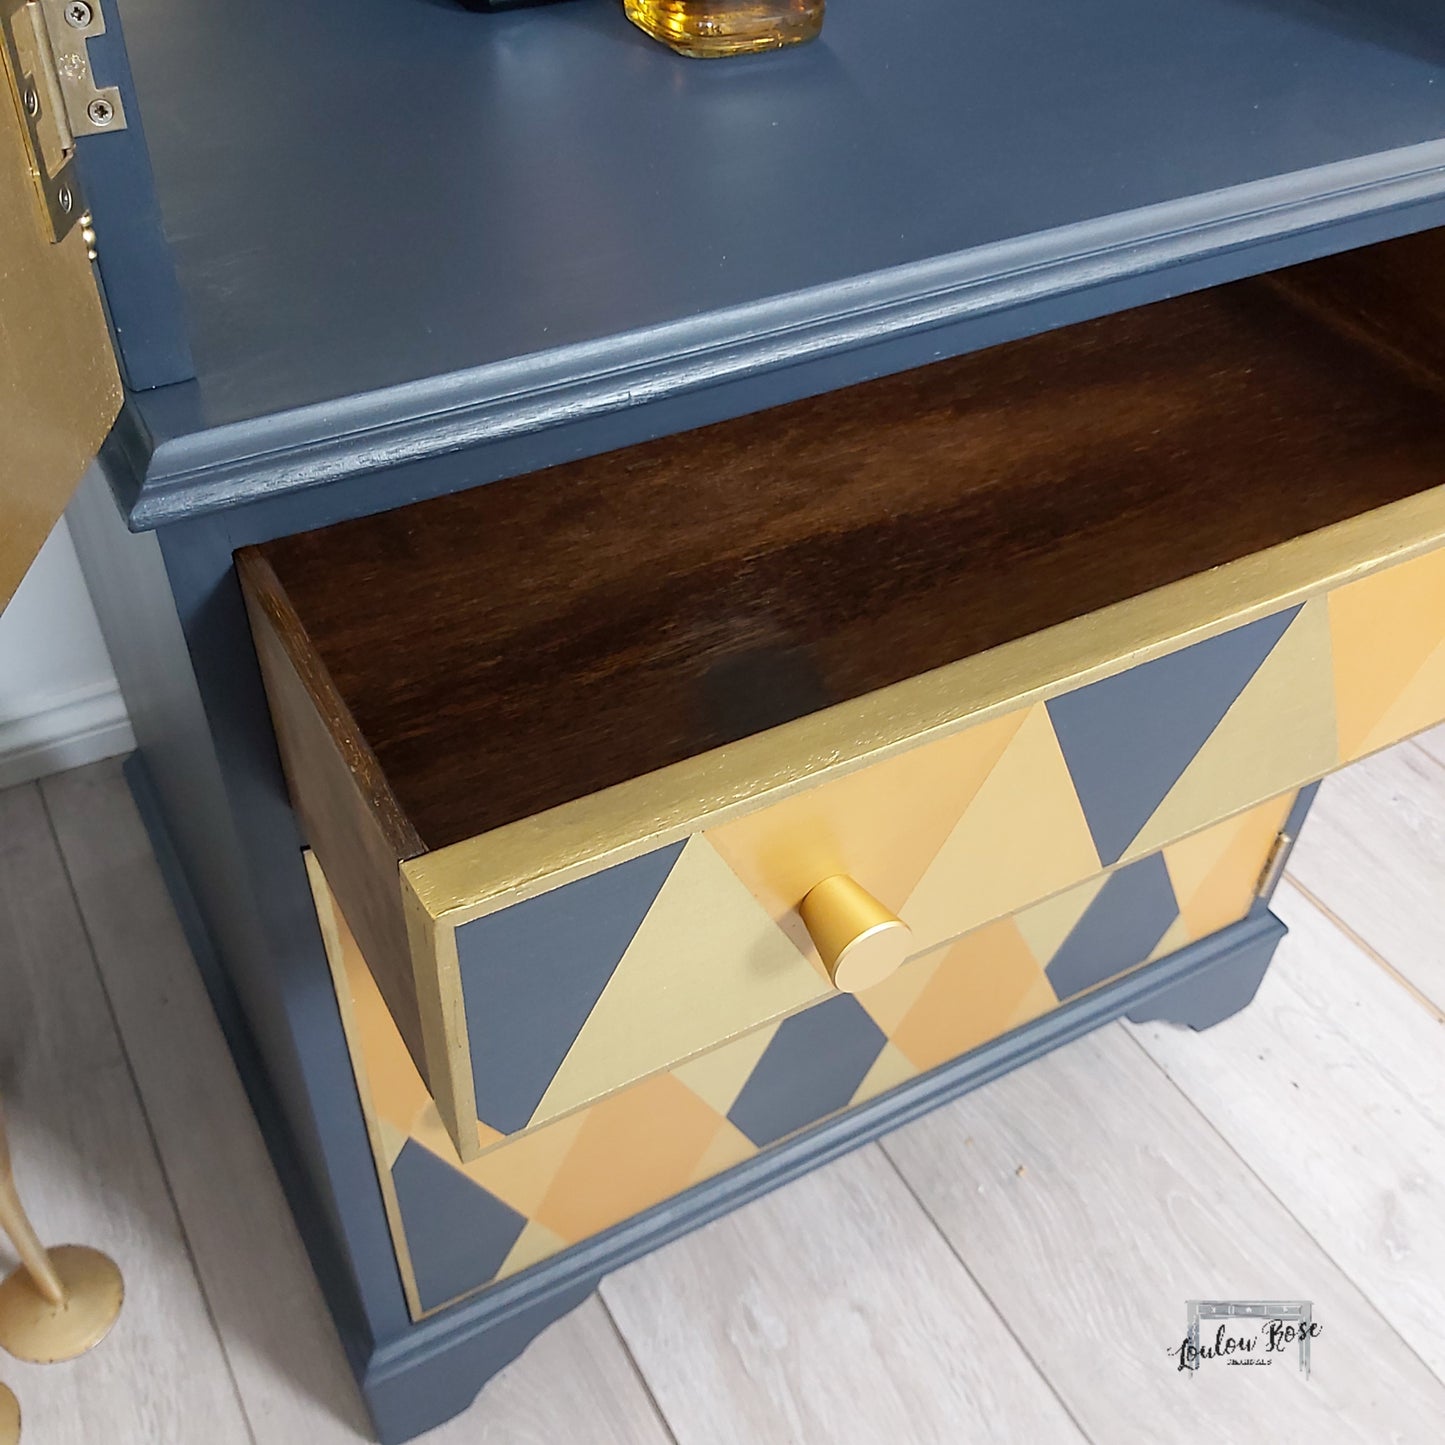 Drinks Cabinet in Navy Blue and Gold with Hand Painted Geometric Design